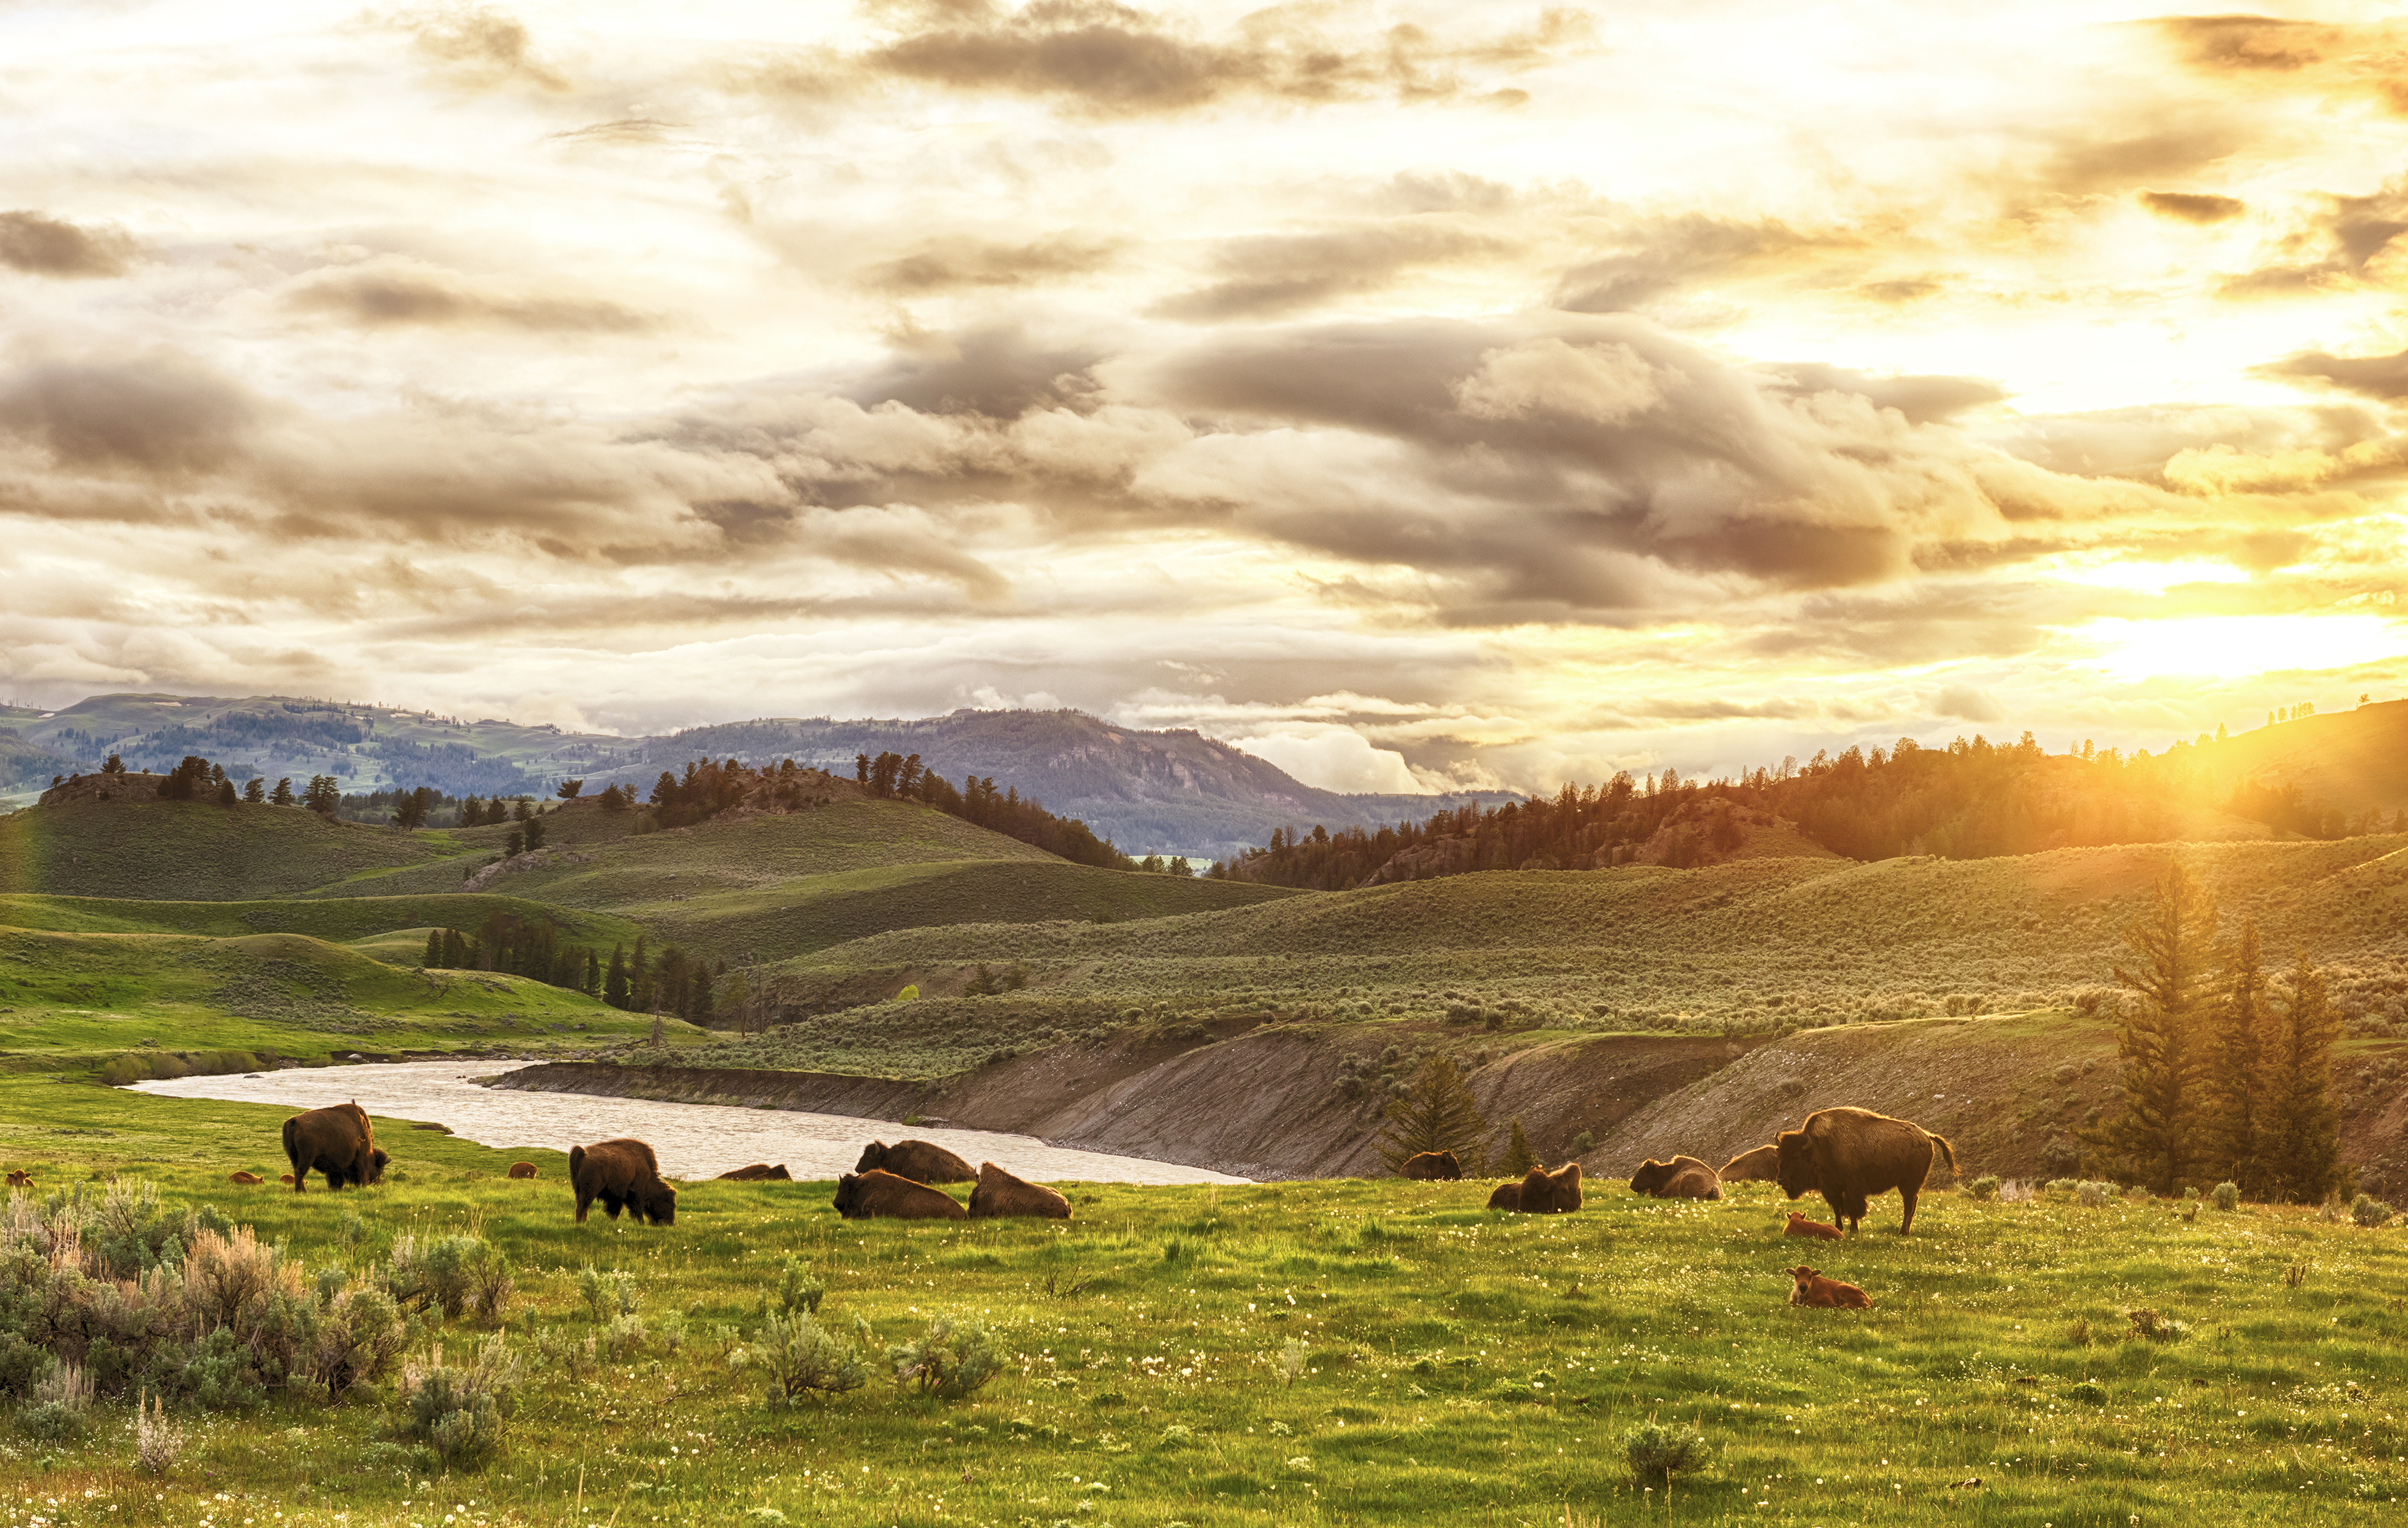 Herd of adult and baby buffaloes (bison bison) at sunset time. Yellowstone National Park, Wyoming, USA